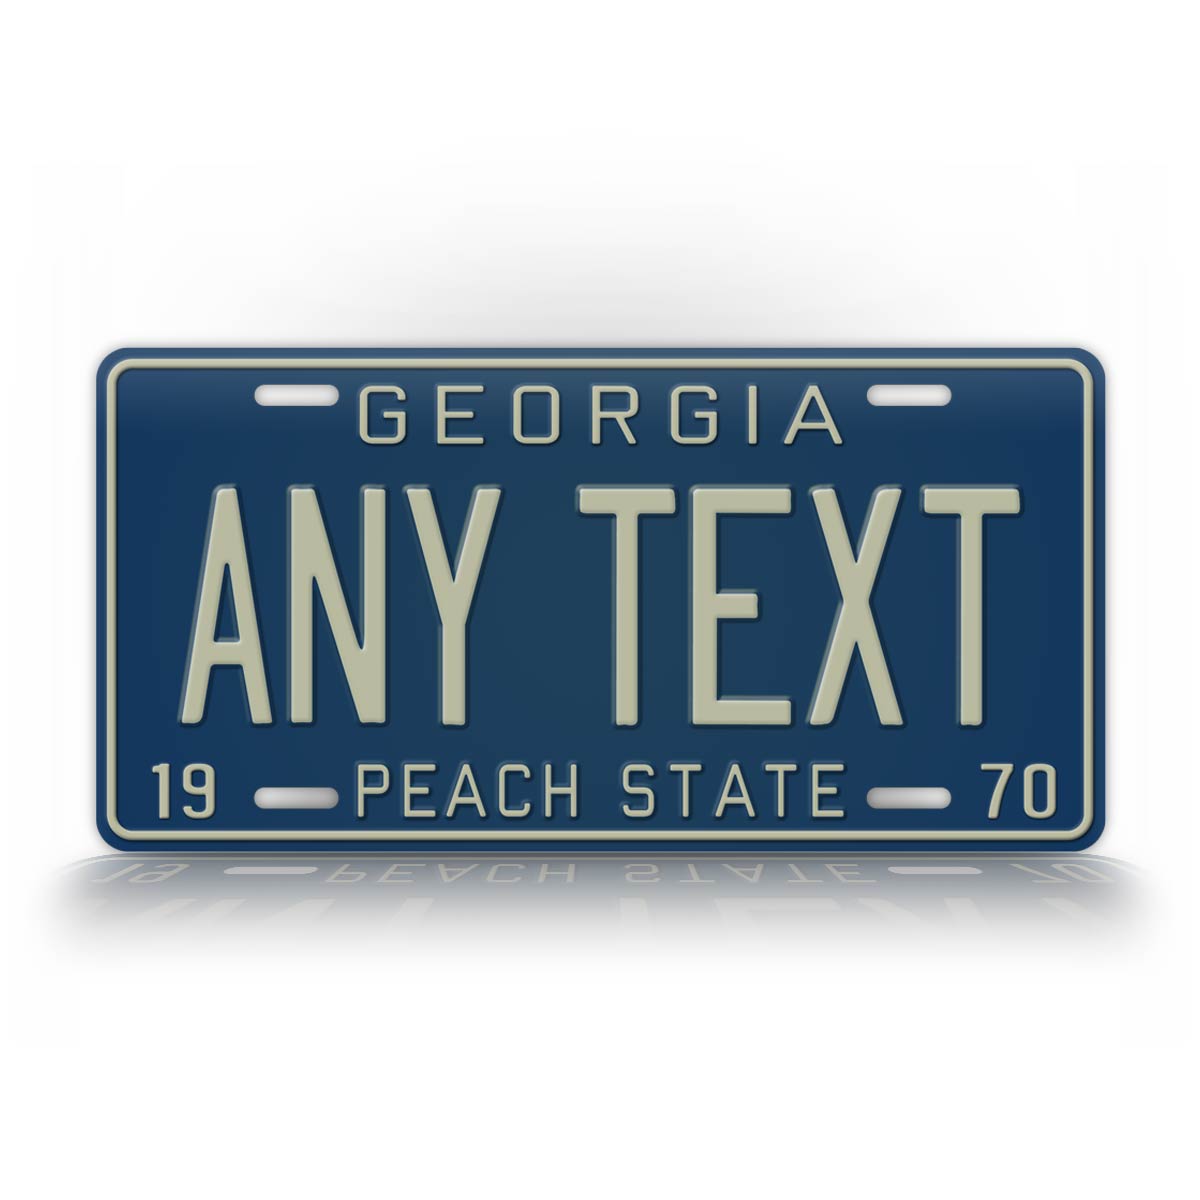 Any Text Antique 1970 Georgia State License Plate